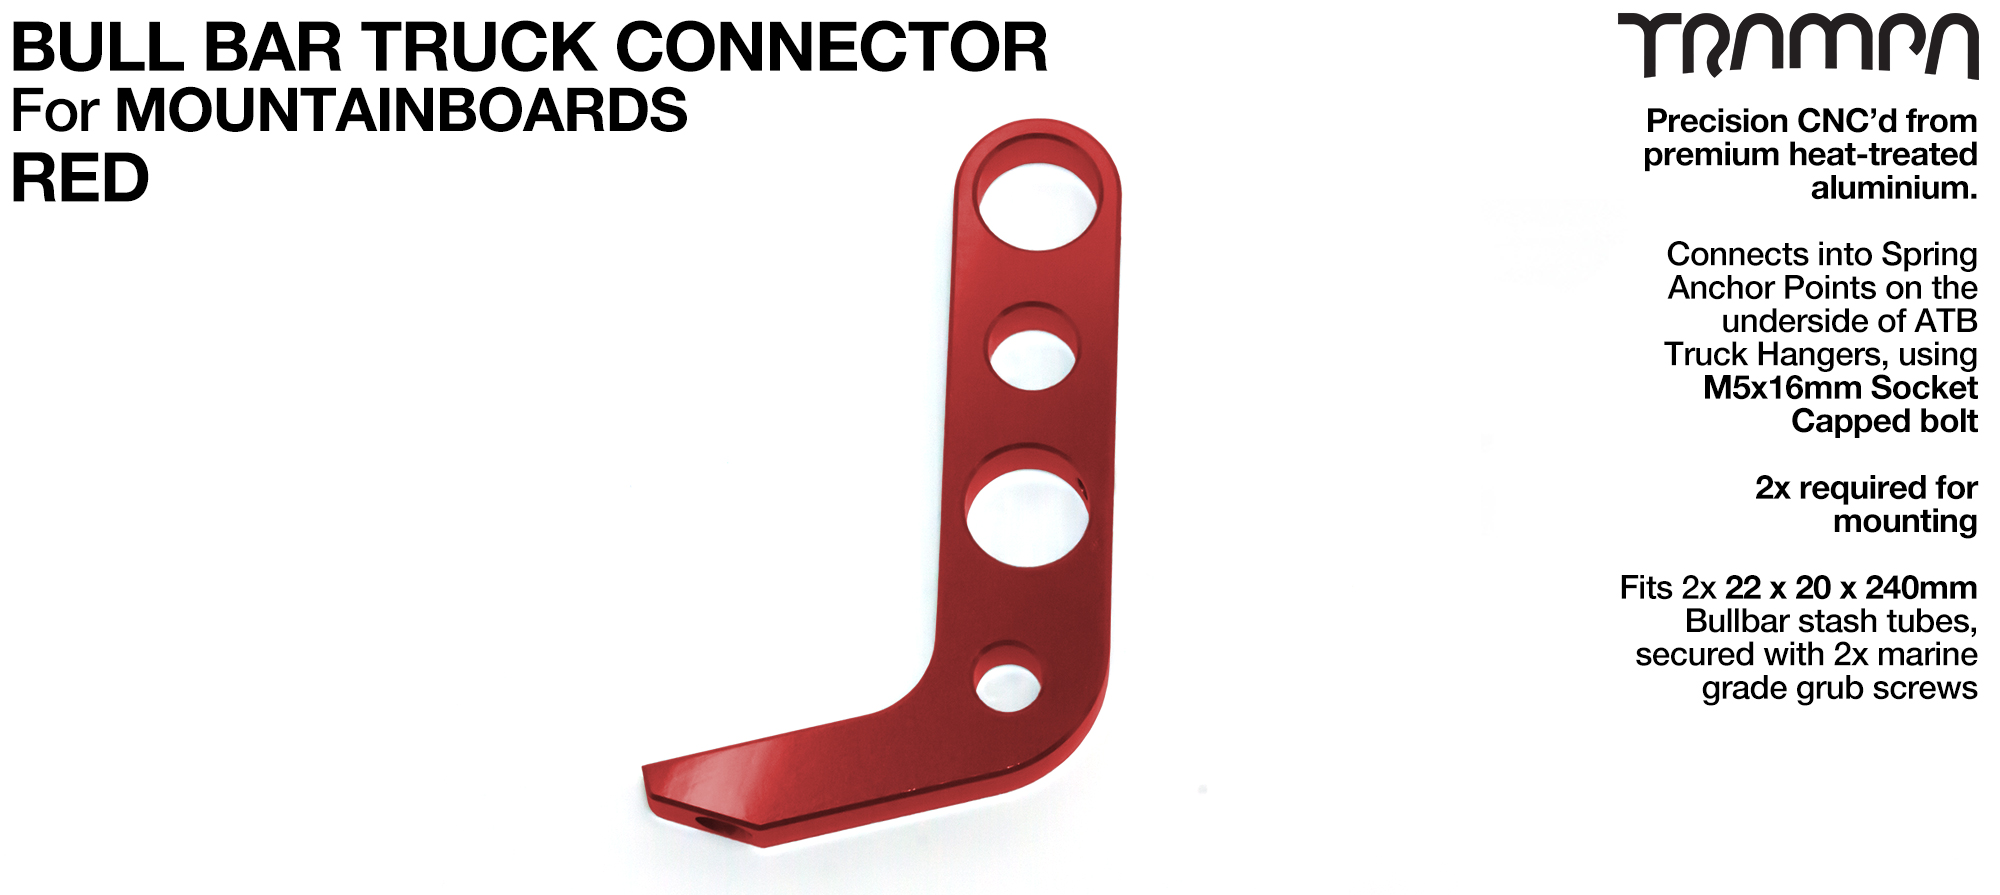 Mountainboard Bull Bar connector - RED 